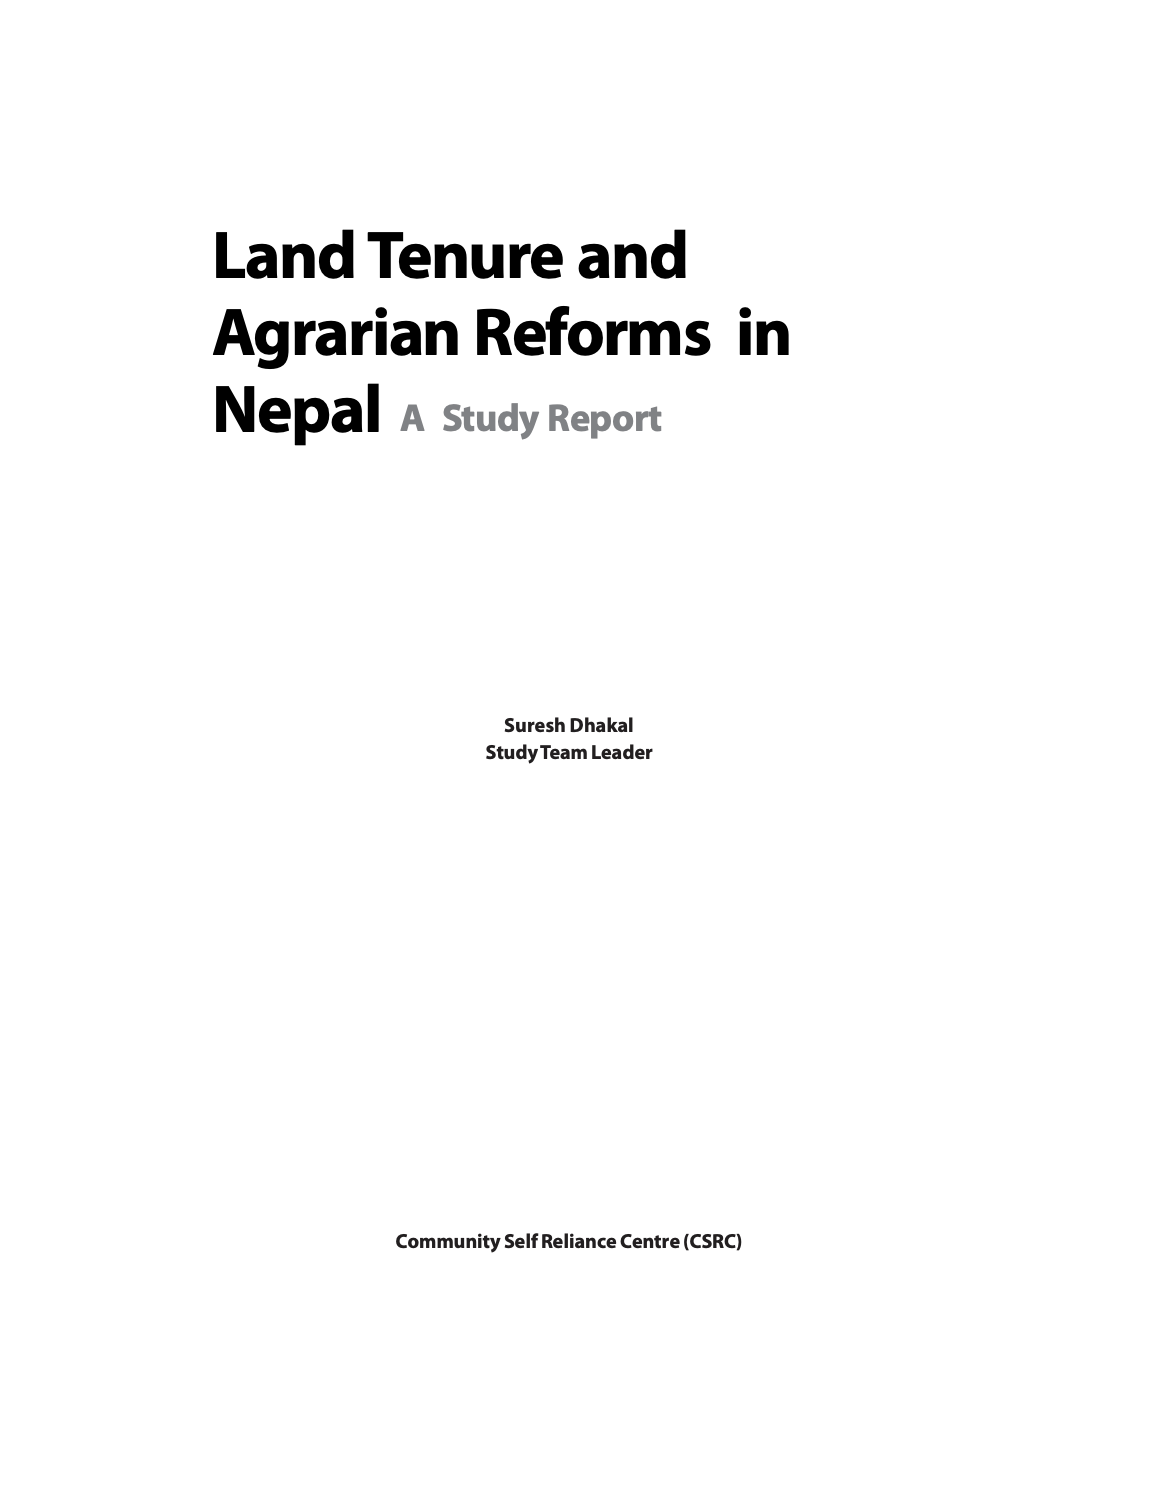 Land Tenure and Agrarian Reforms in Nepal: A Study Report